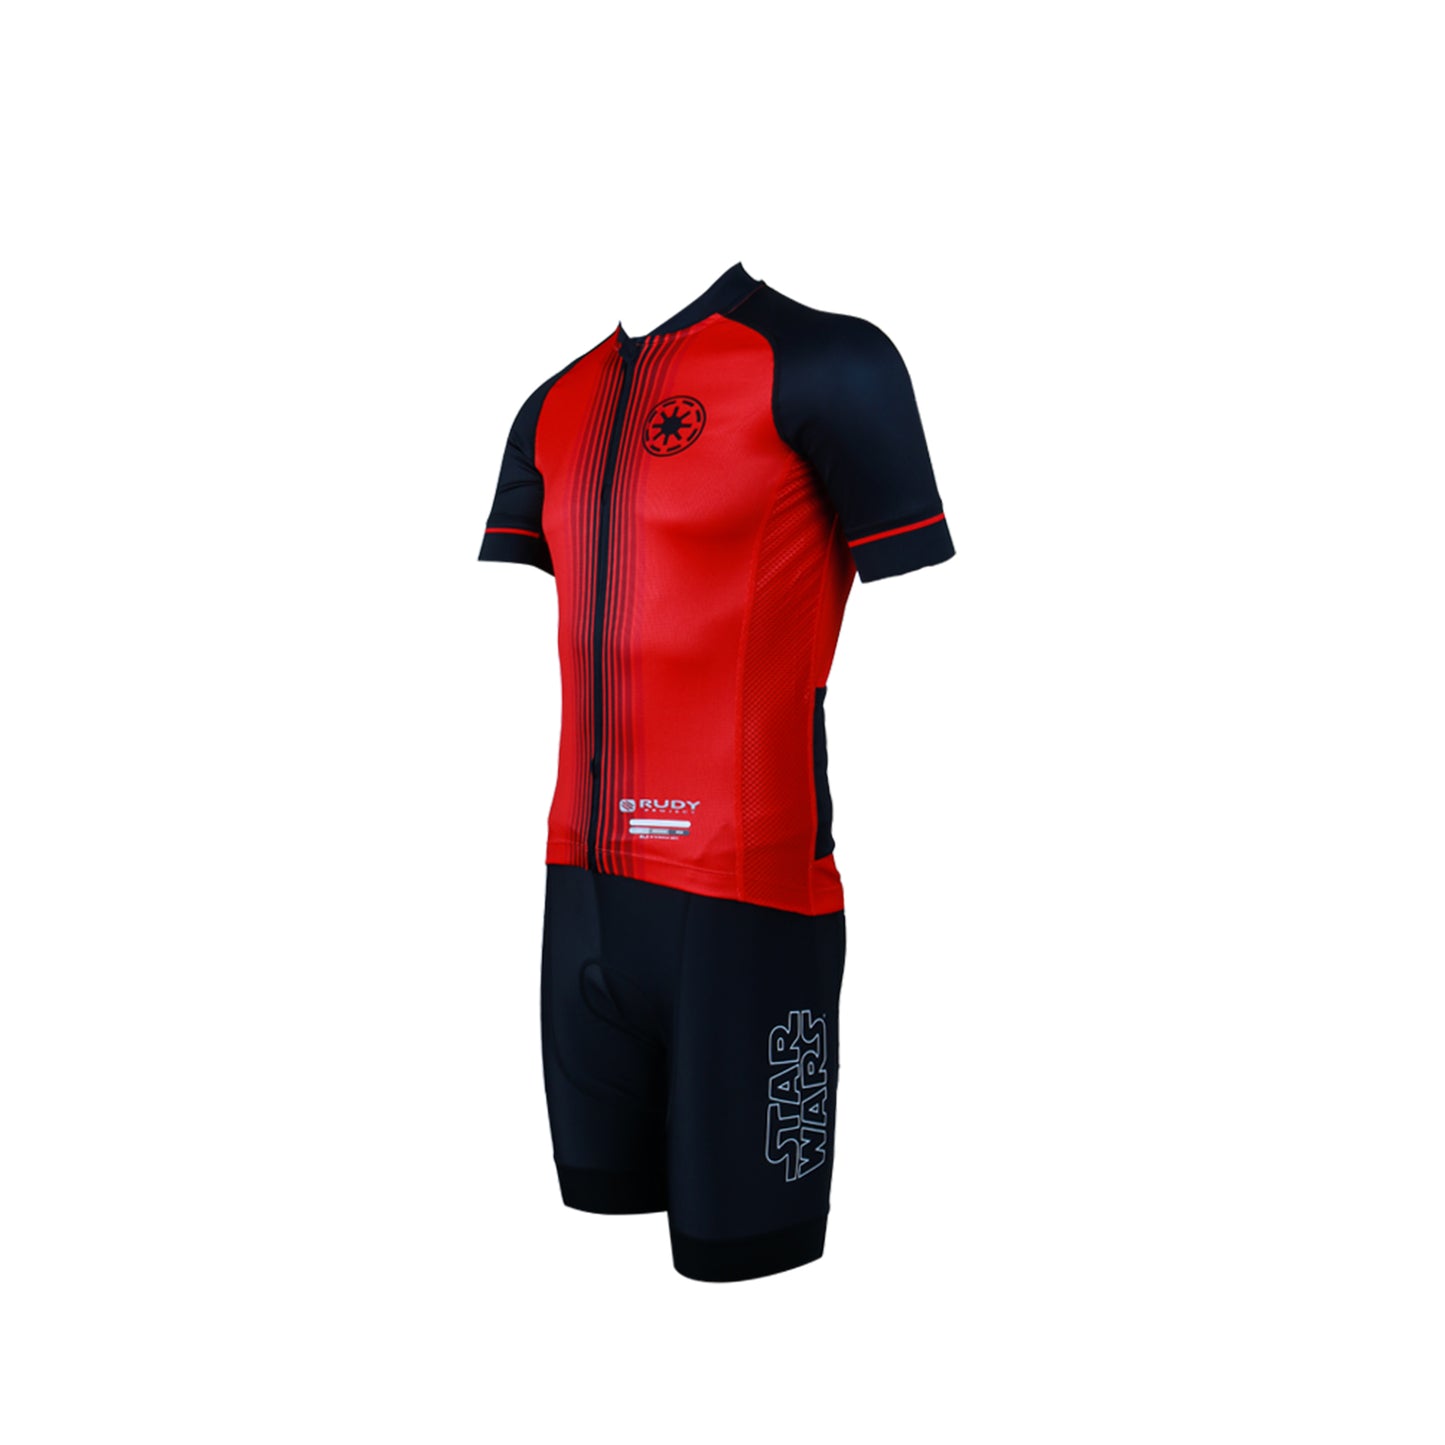 Rudy Project Star Wars Darth Vader Empire Cycling Jersey - Red